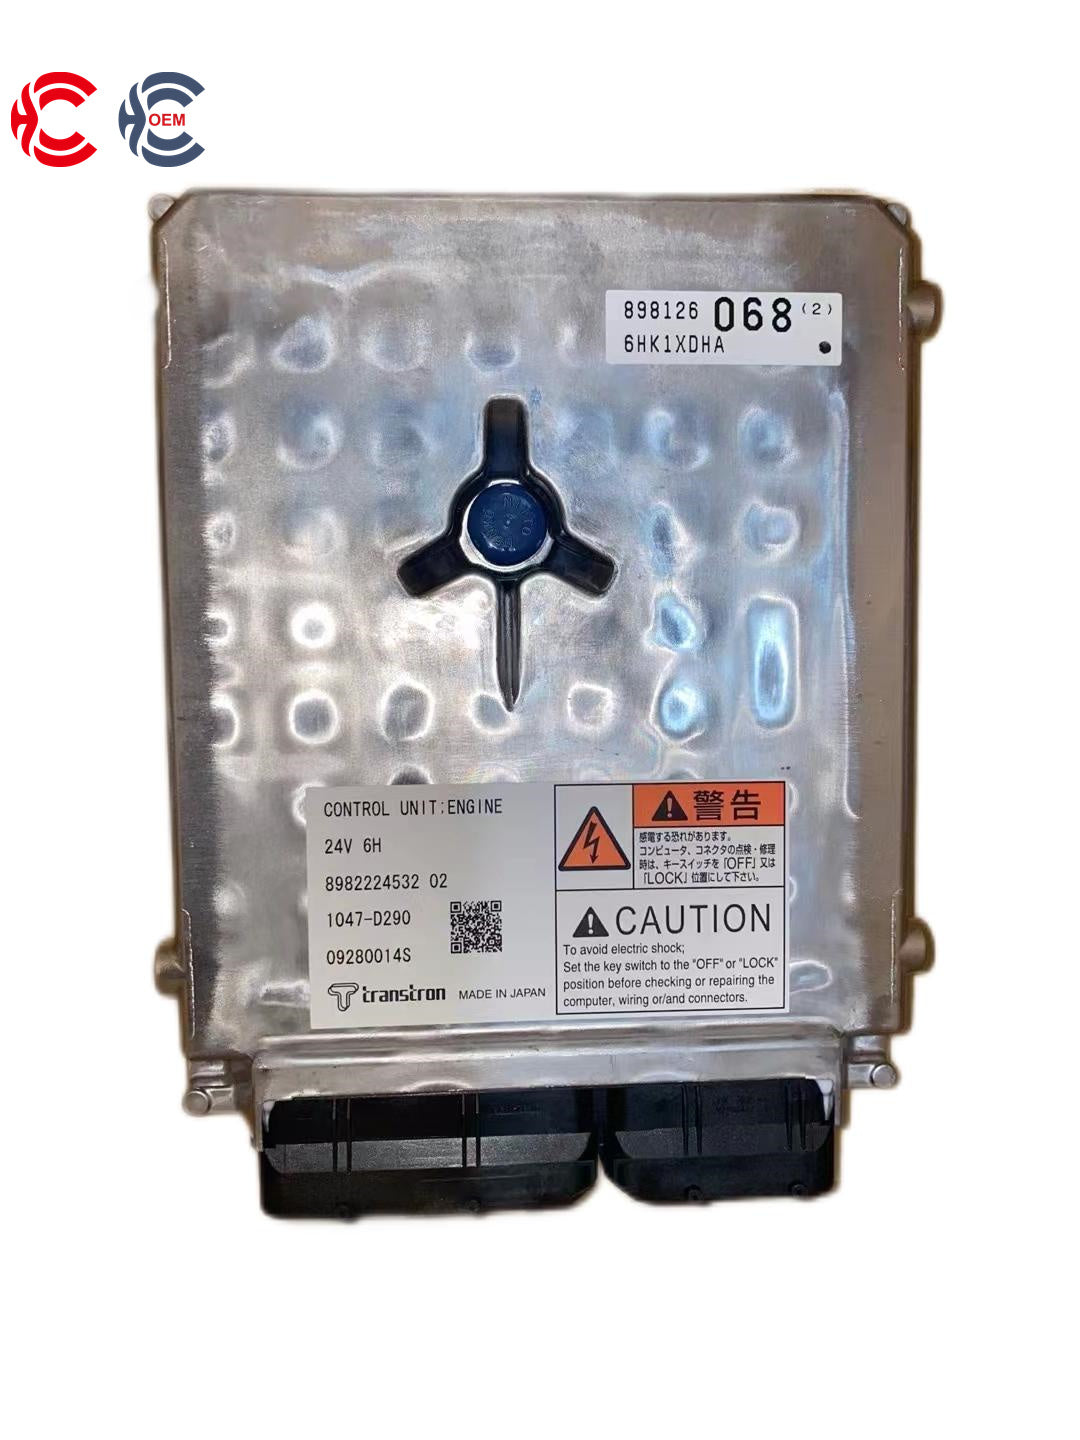 OEM: 8982224532 1047-D290 09280014SMaterial: MetalColor: SilverOrigin: Made in ChinaWeight: 1500gPacking List: 1* ECU Diesel Engine More ServiceWe can provide OEM Manufacturing serviceWe can Be your one-step solution for Auto PartsWe can provide technical scheme for you Feel Free to Contact Us, We will get back to you as soon as possible.